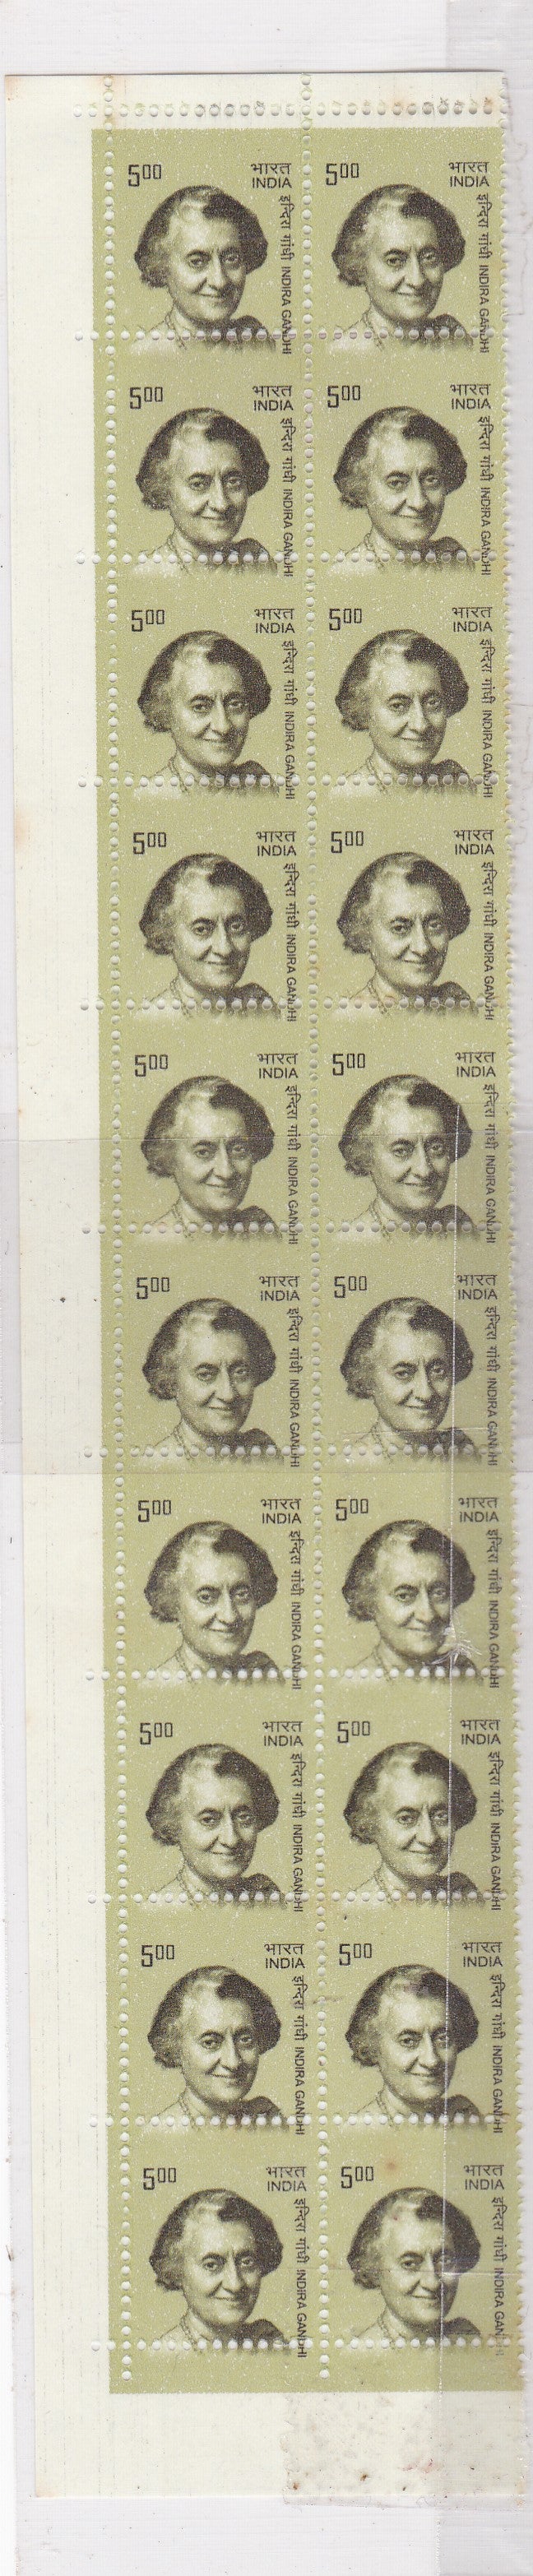 India  -Indra Gandhi  Definitive stamps with Perforation shifted error.